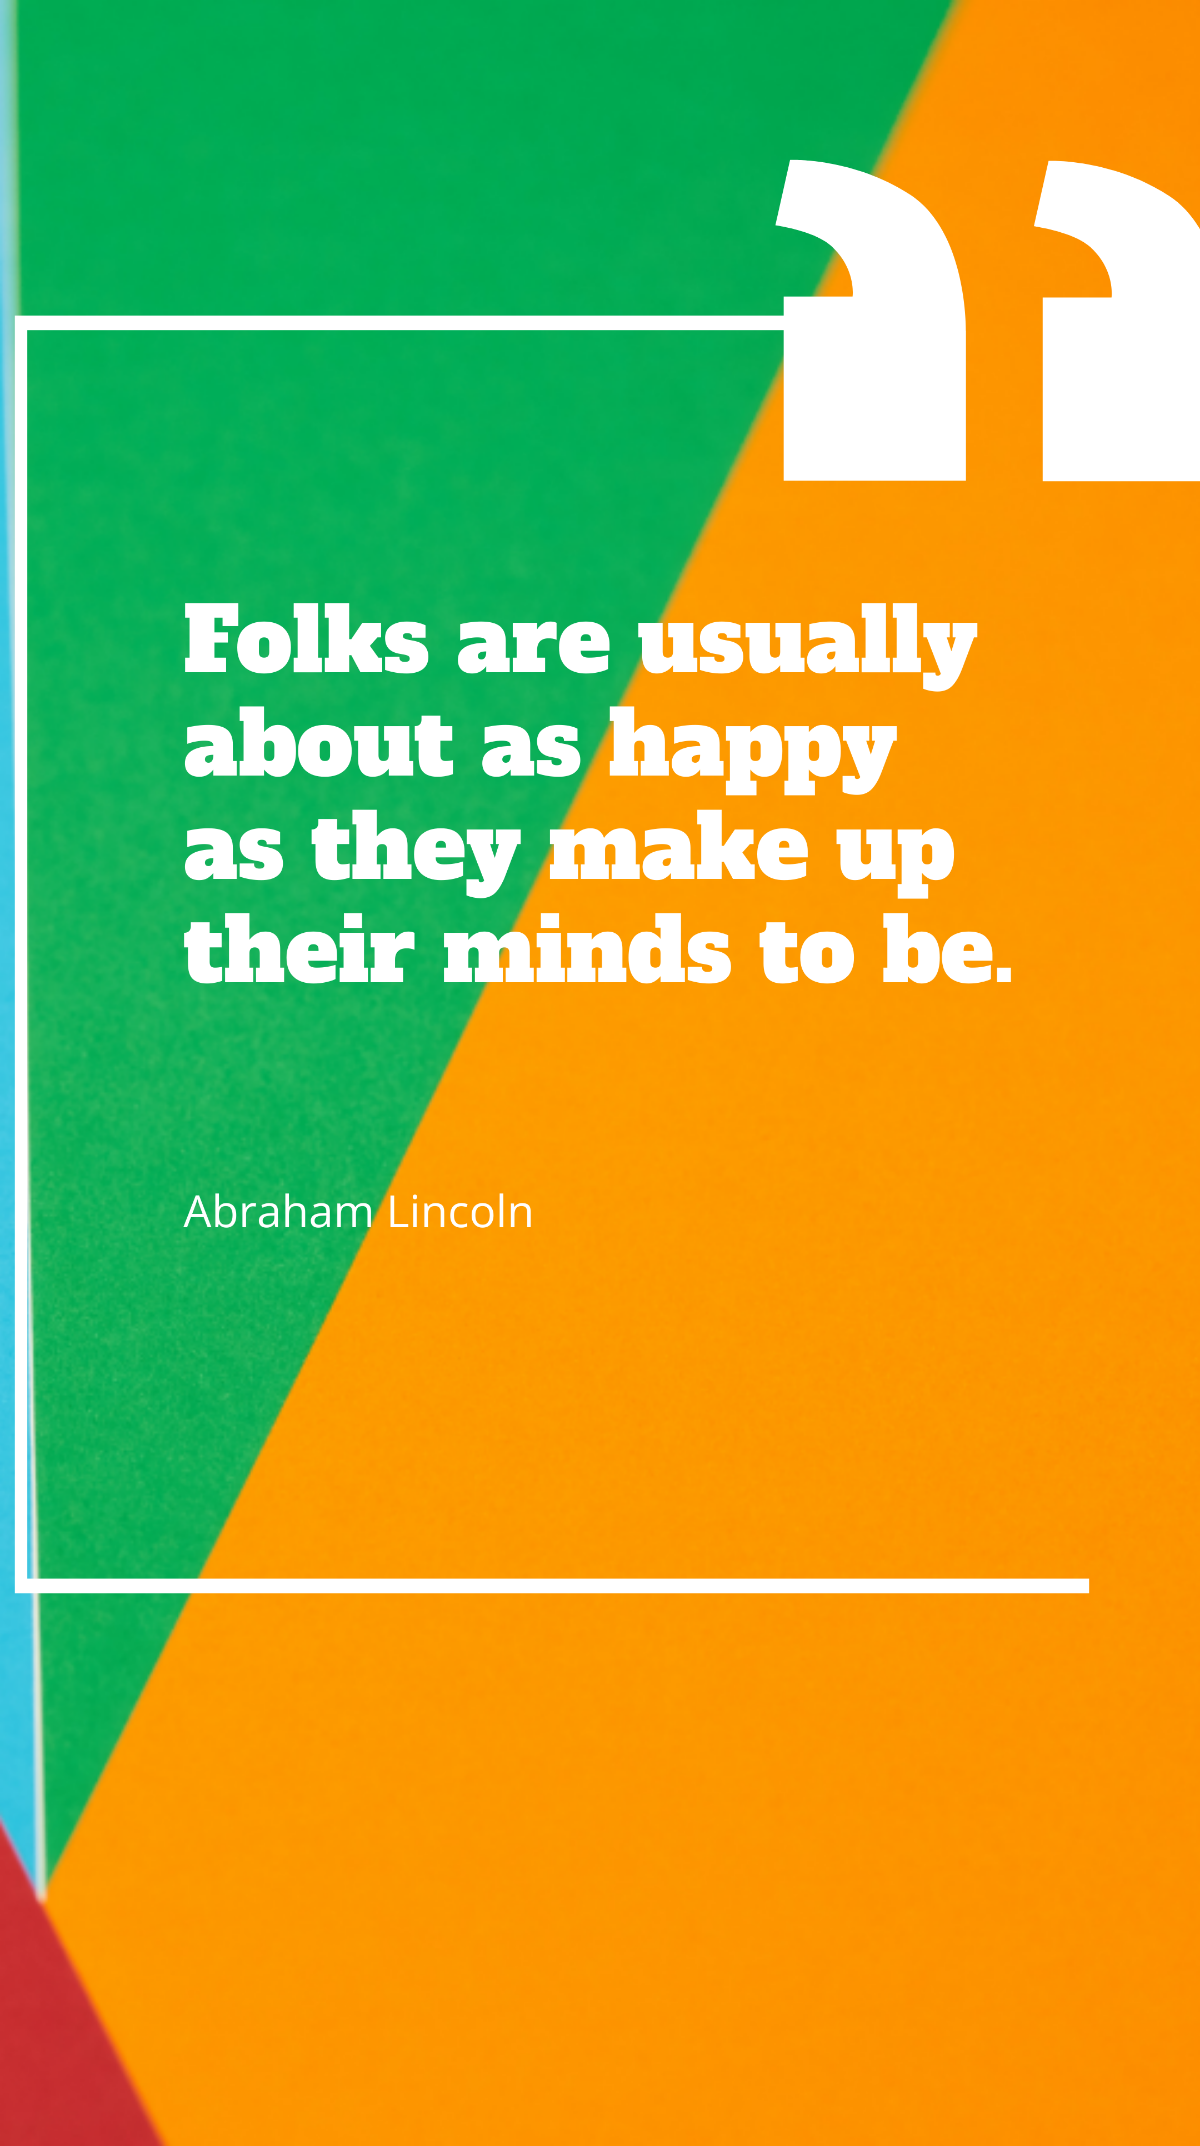 Abraham Lincoln - Folks are usually about as happy as they make up their minds to be. Template